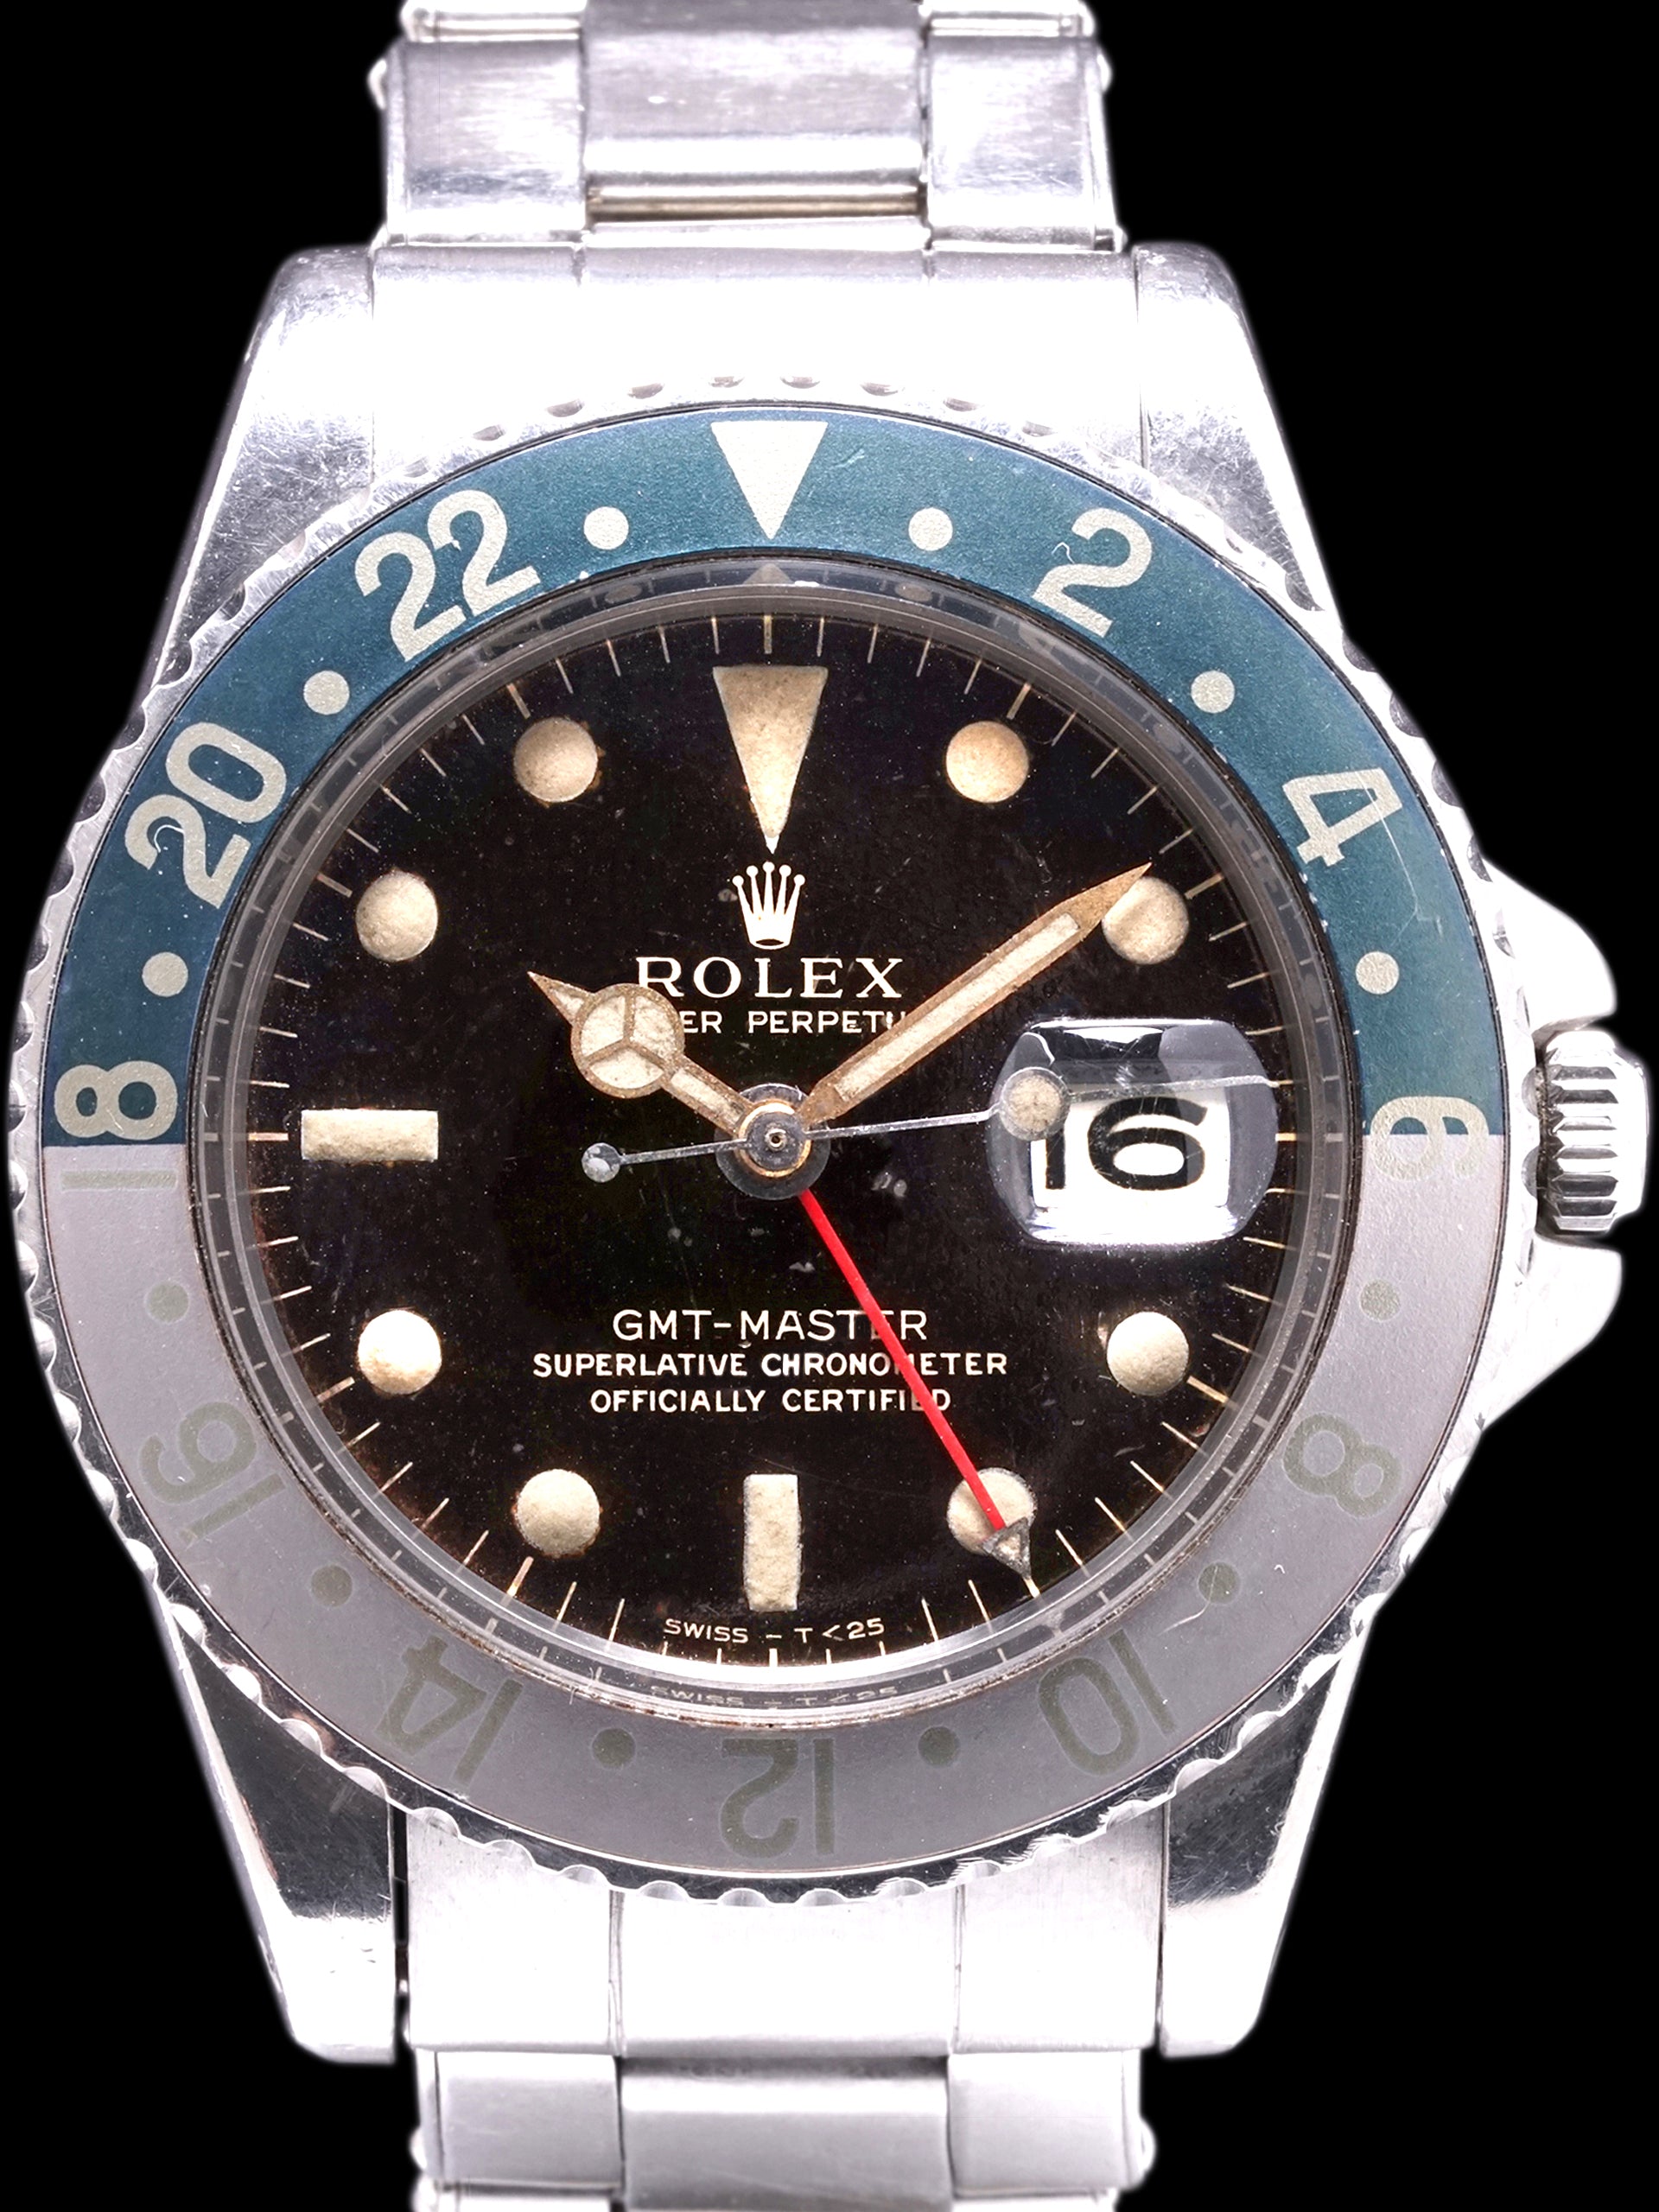 Tropical 1963 Rolex GMT-Master (Ref. 1675) Gilt PCG W/ RSC Papers, Box, & Military Provenance